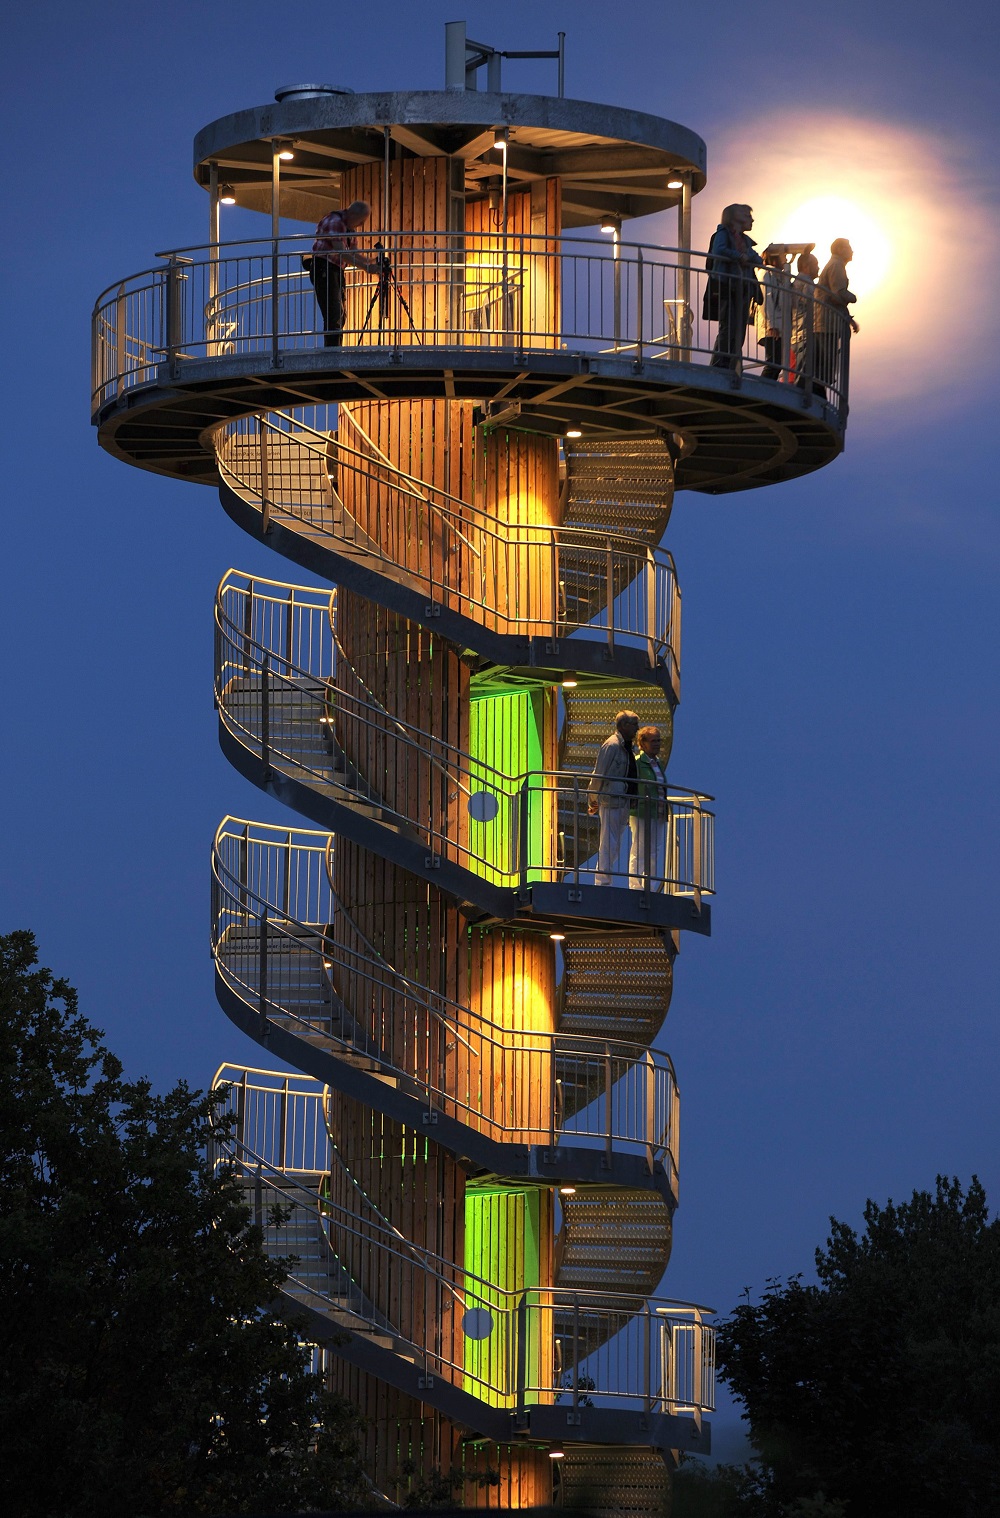 New viewing tower